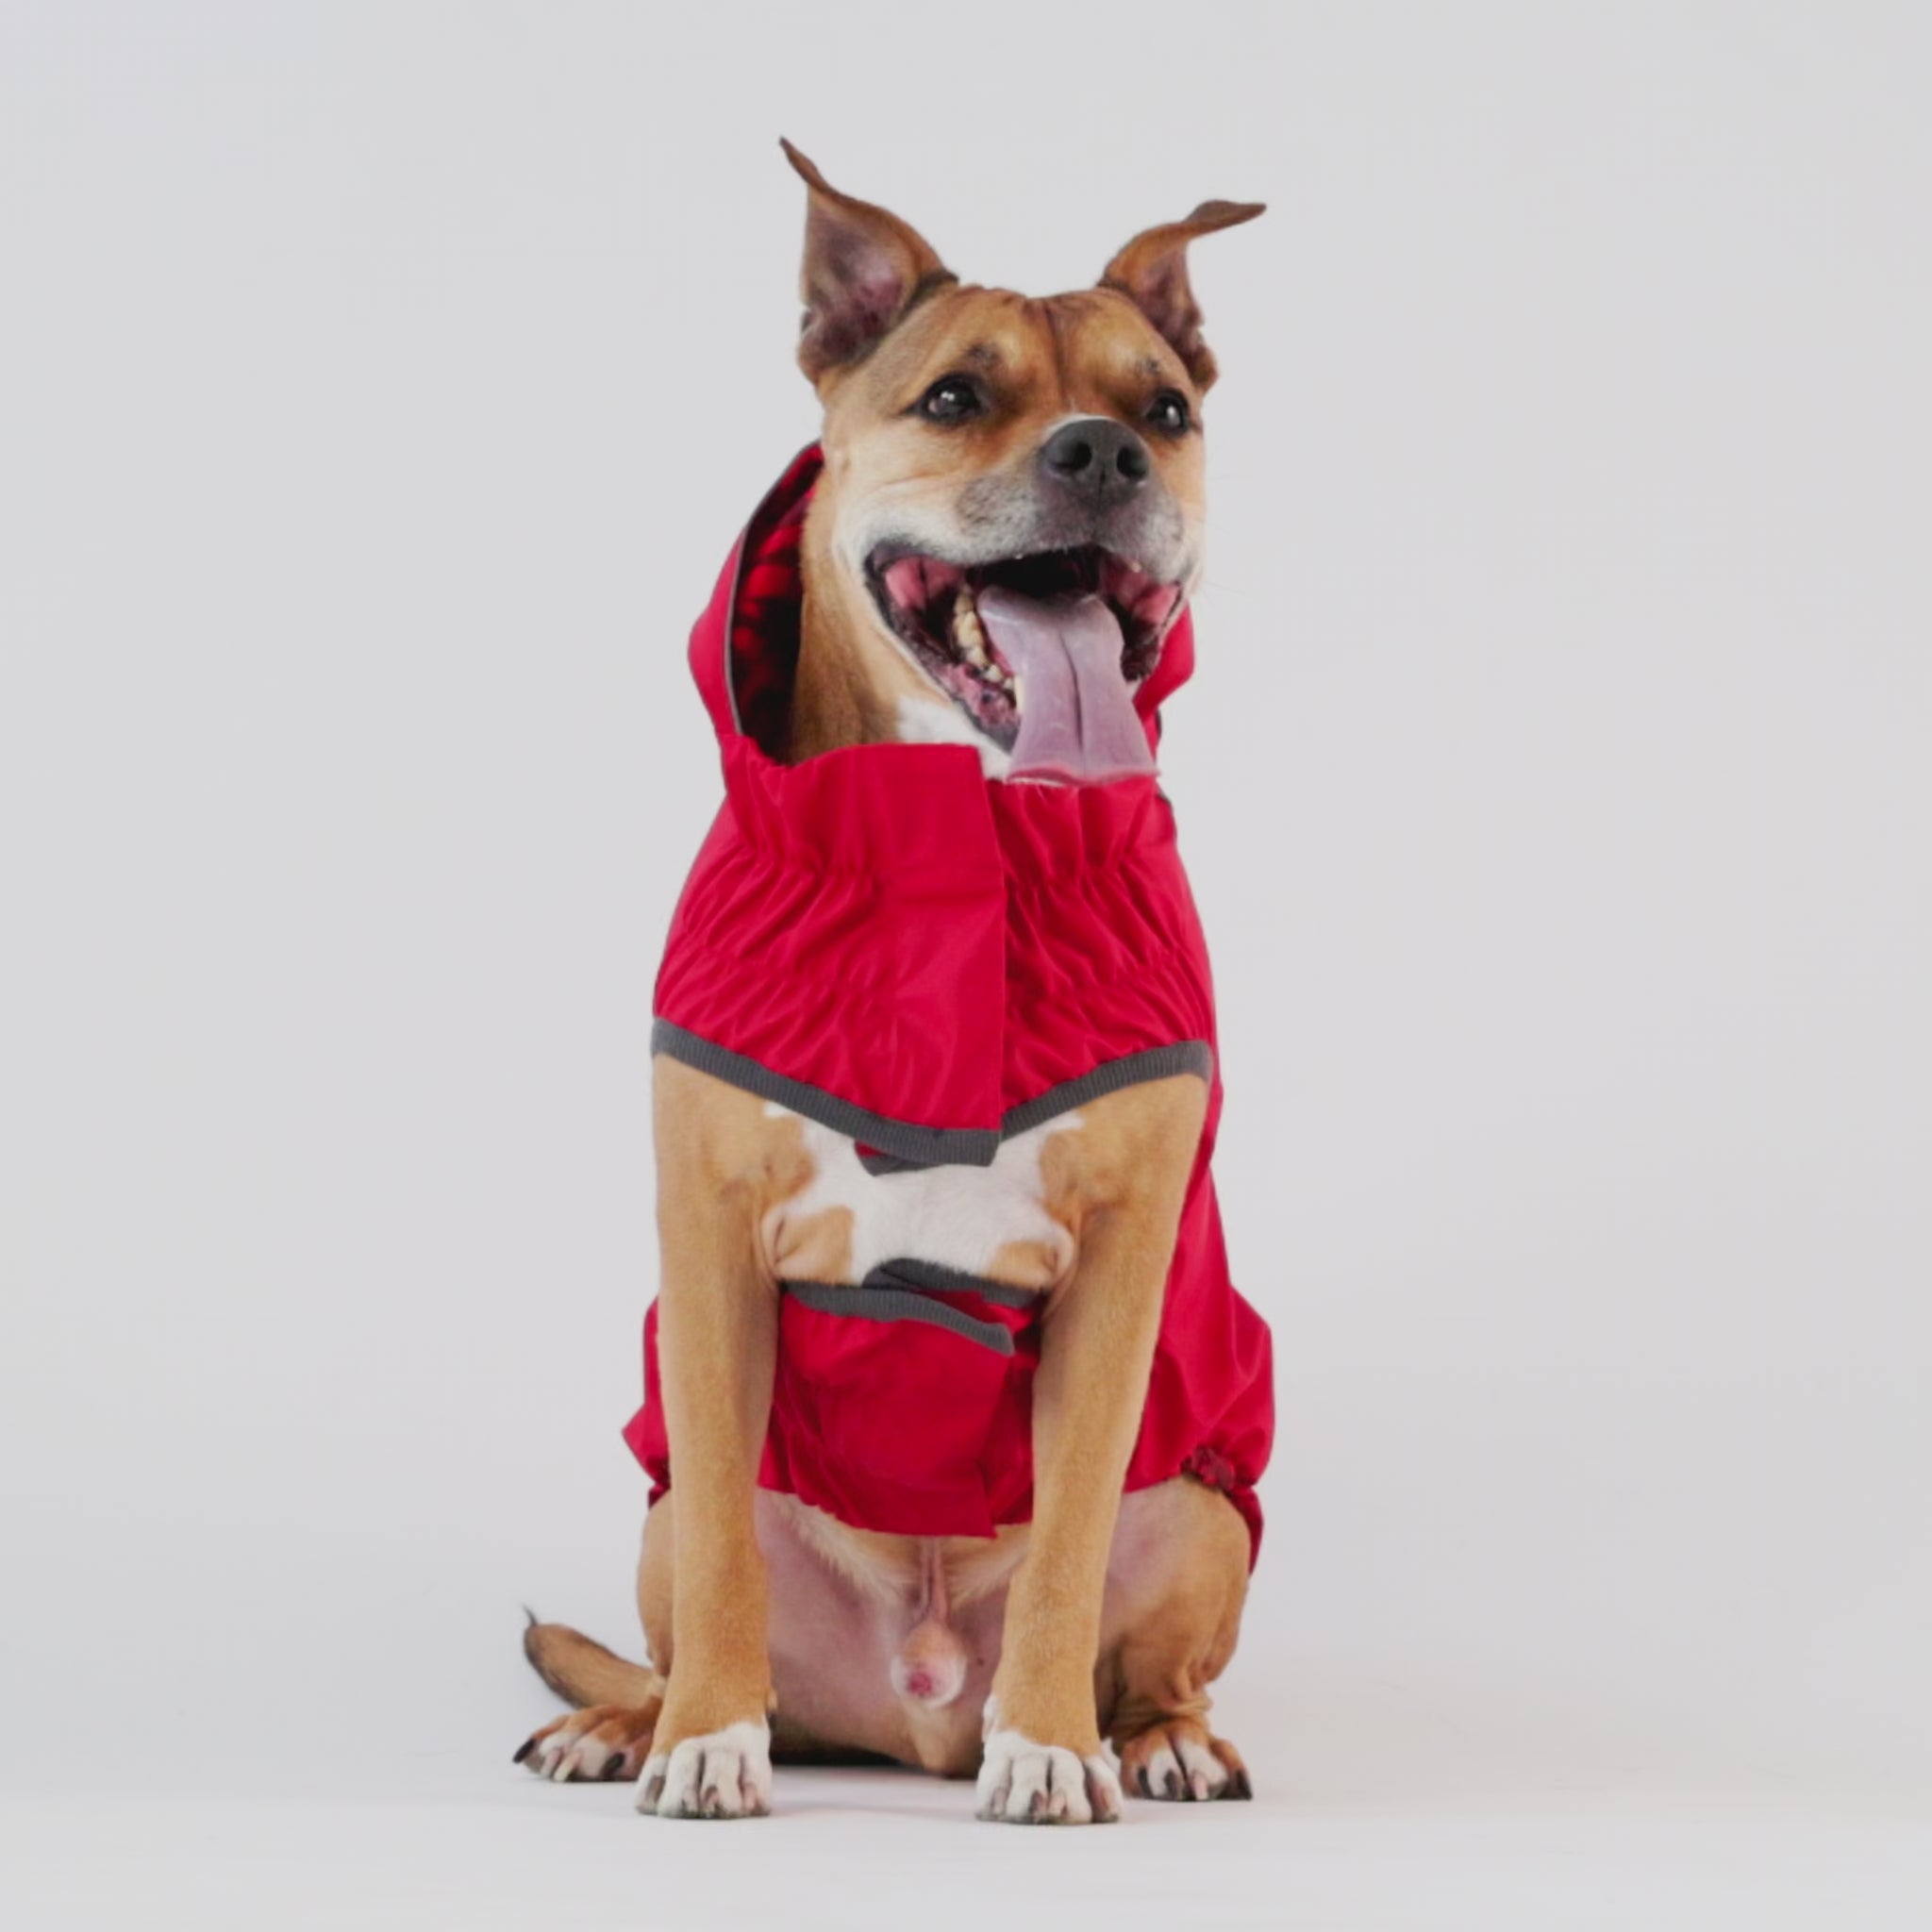 A video of a golden American Staffordshire Terrier wearing a red raincoat, sitting and panting, followed by a fawn French Bulldog wearing a red raincoat with abstract print walking by 